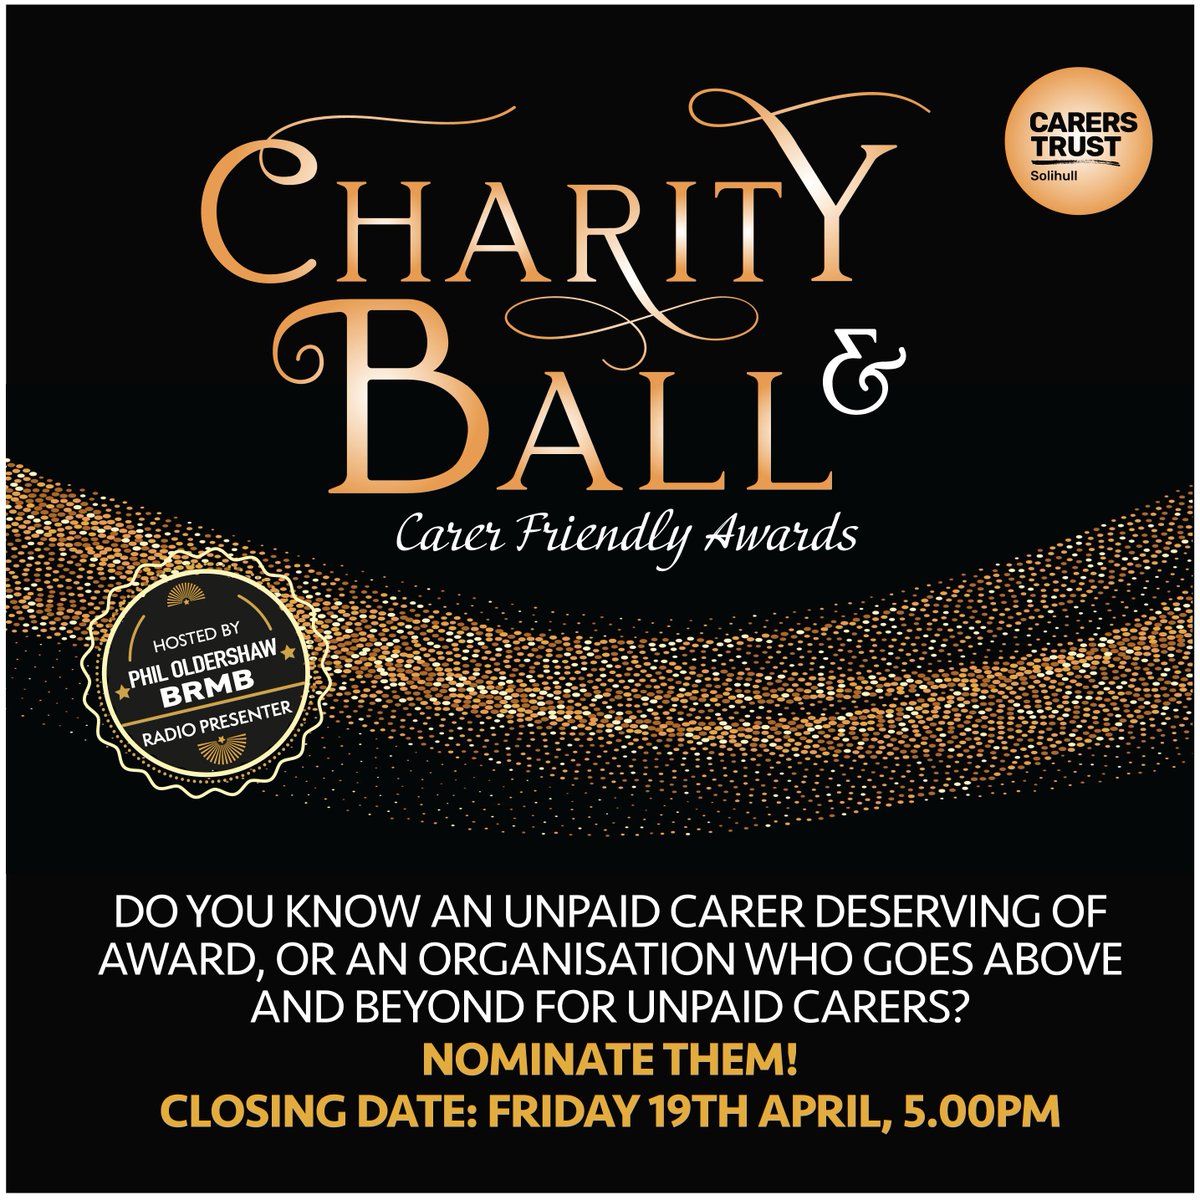 Our Charity Ball & Carer Friendly Awards are back! We aim to celebrate & appreciate those who often feel they go unnoticed: #unpaidcarers Make your nominations and find out how else you can support here: buff.ly/3IzqJis @SolihullCouncil @CarersTrust #carers #Solihull